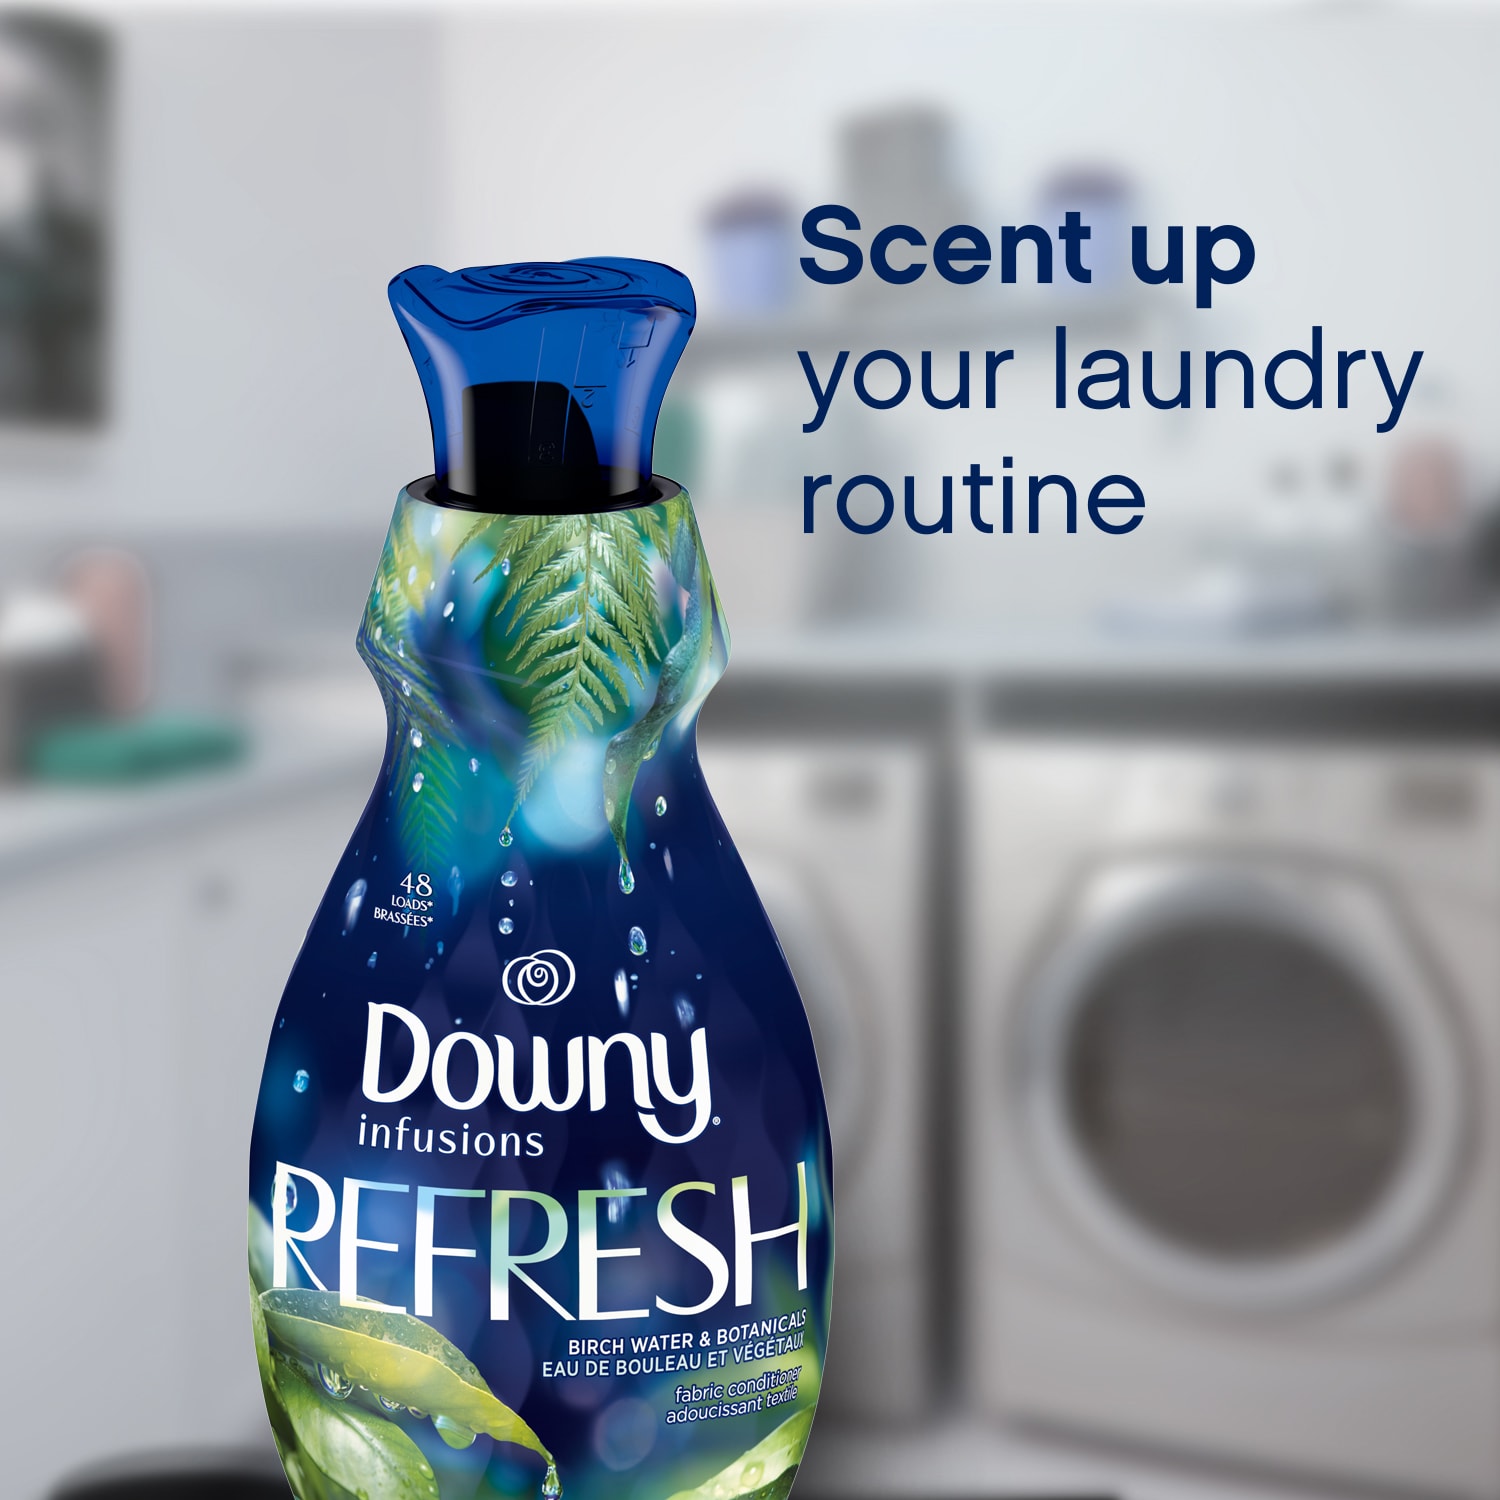 Downy or Comfort fabric softener, Which is better? - HubPages